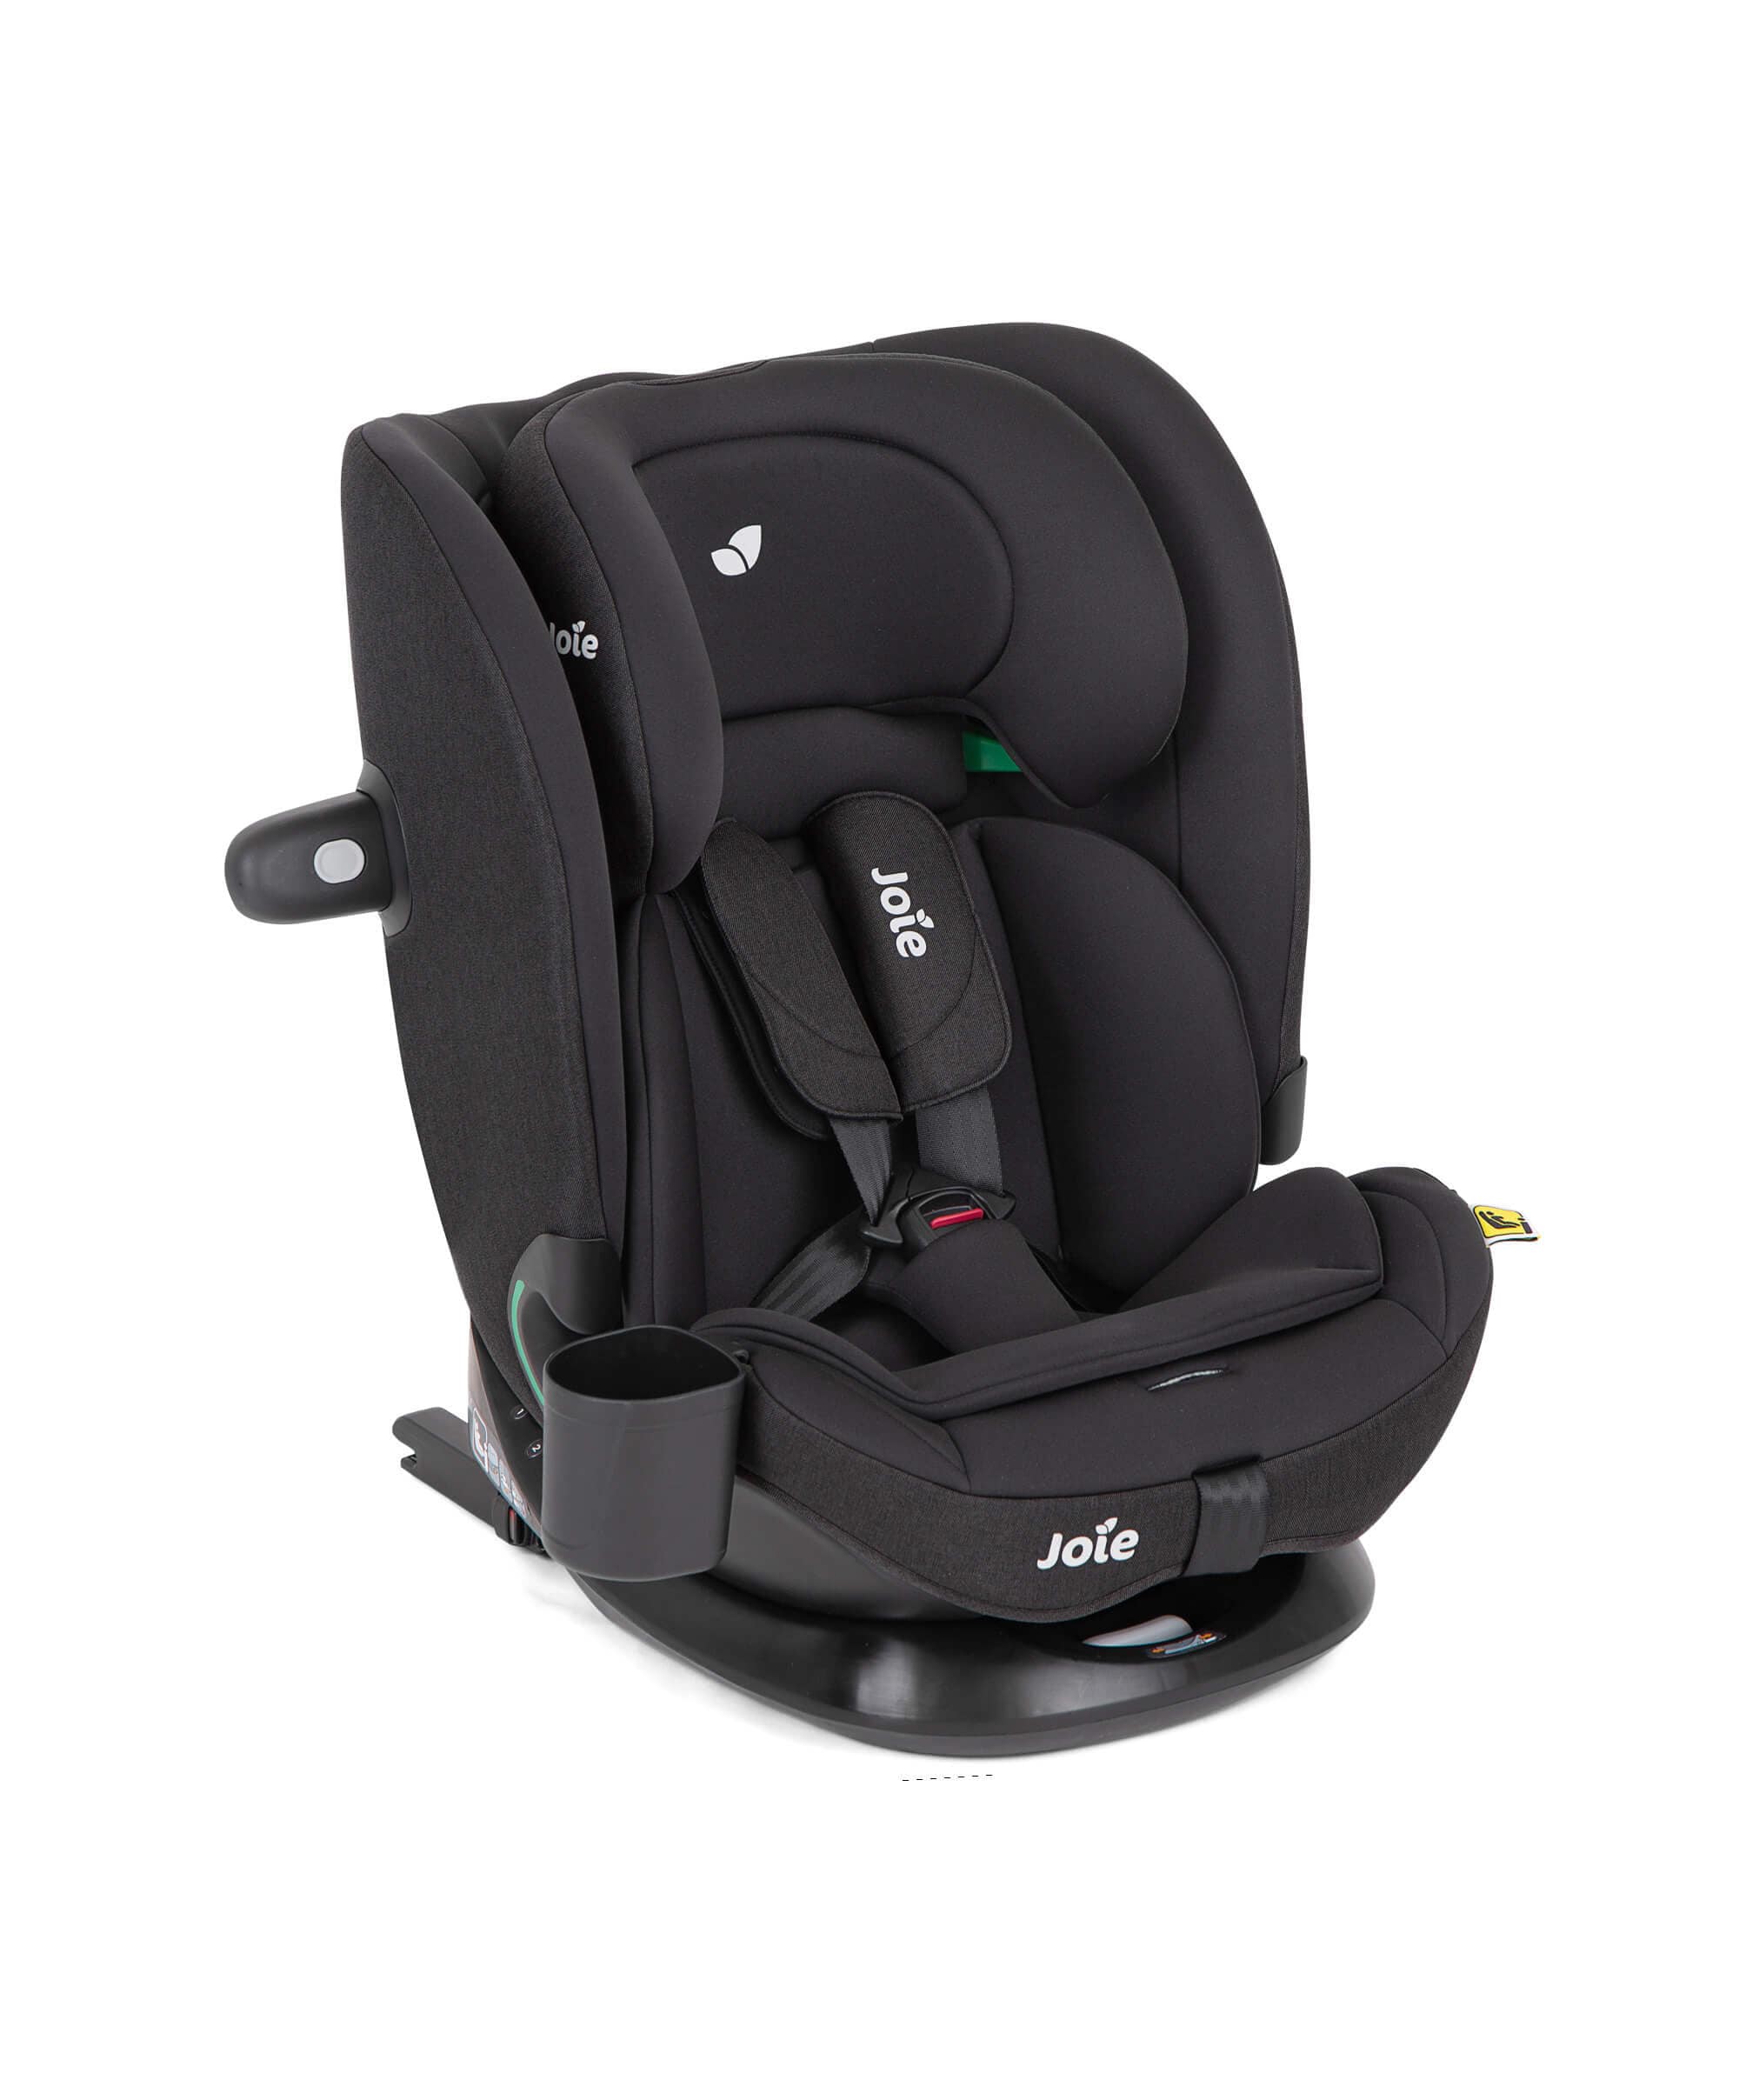 Joie Traver Group 2-3 Car Seat - Coal